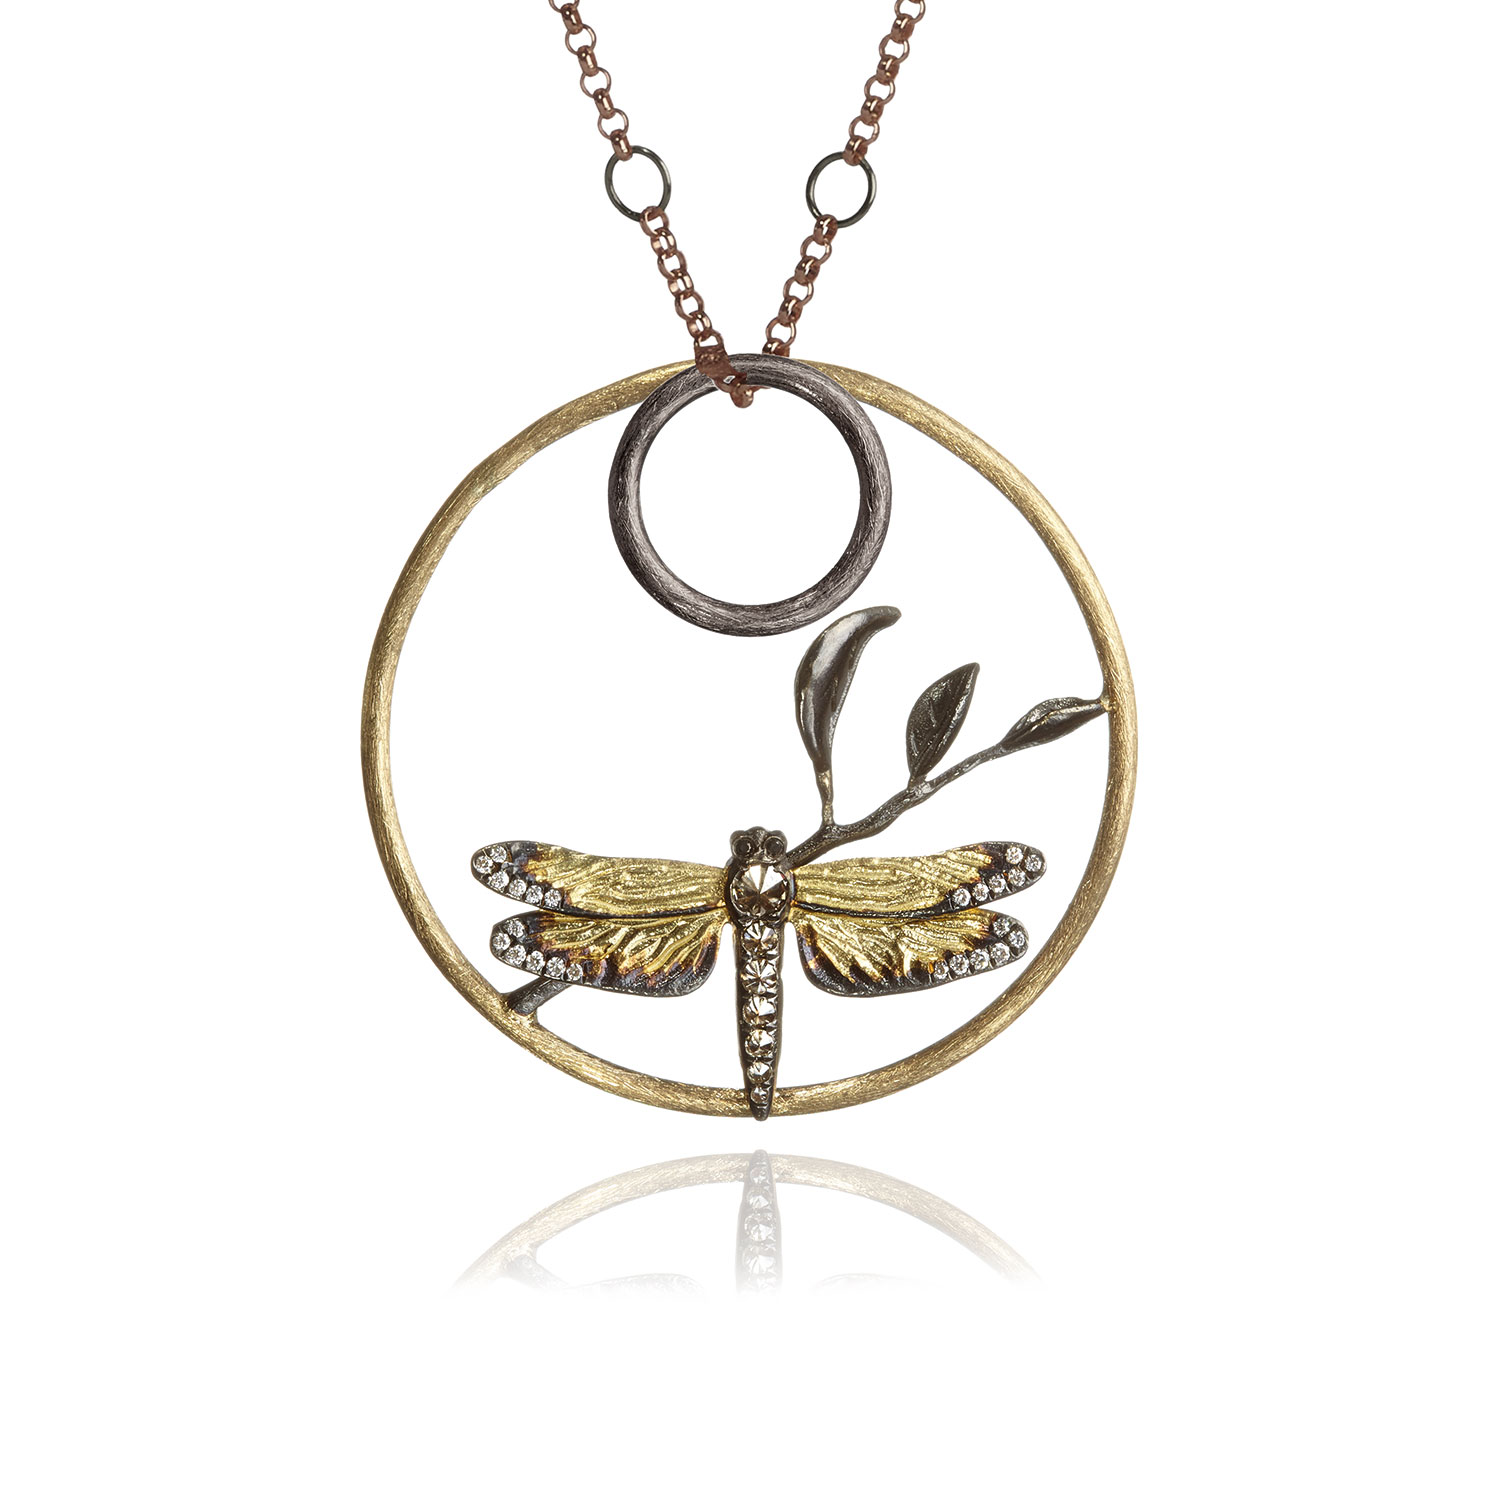 18ct-Gold-&-Diamond-Hoopla-Dragonfly-Pendant-£2900-(worn-as-necklace)